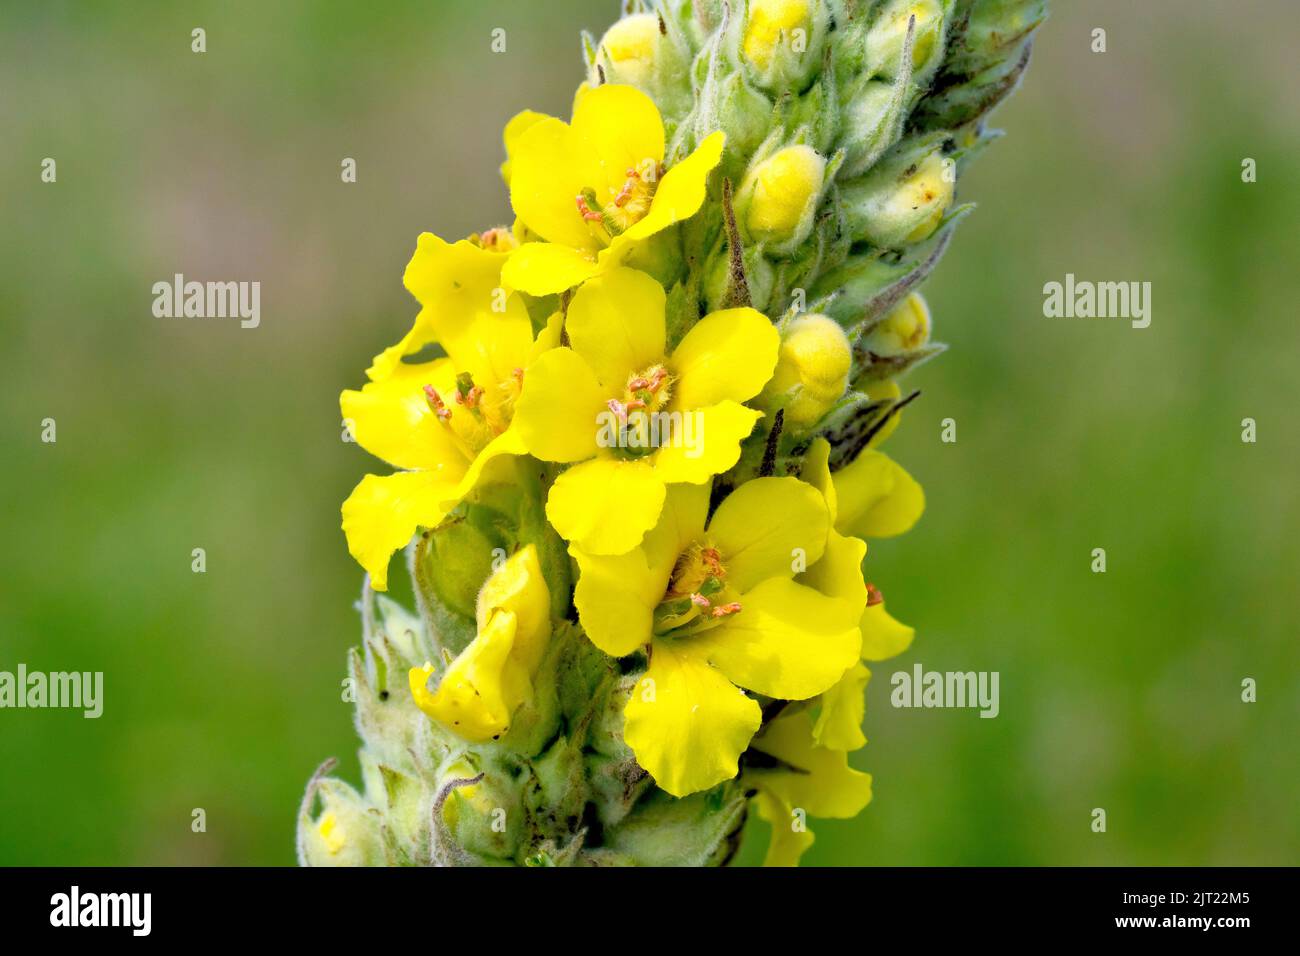 Great Mullein or Aaron's Rod (verbascum thapsus), close up of the large yellow flowers produced on the tall flowering spike of the plant. Stock Photo